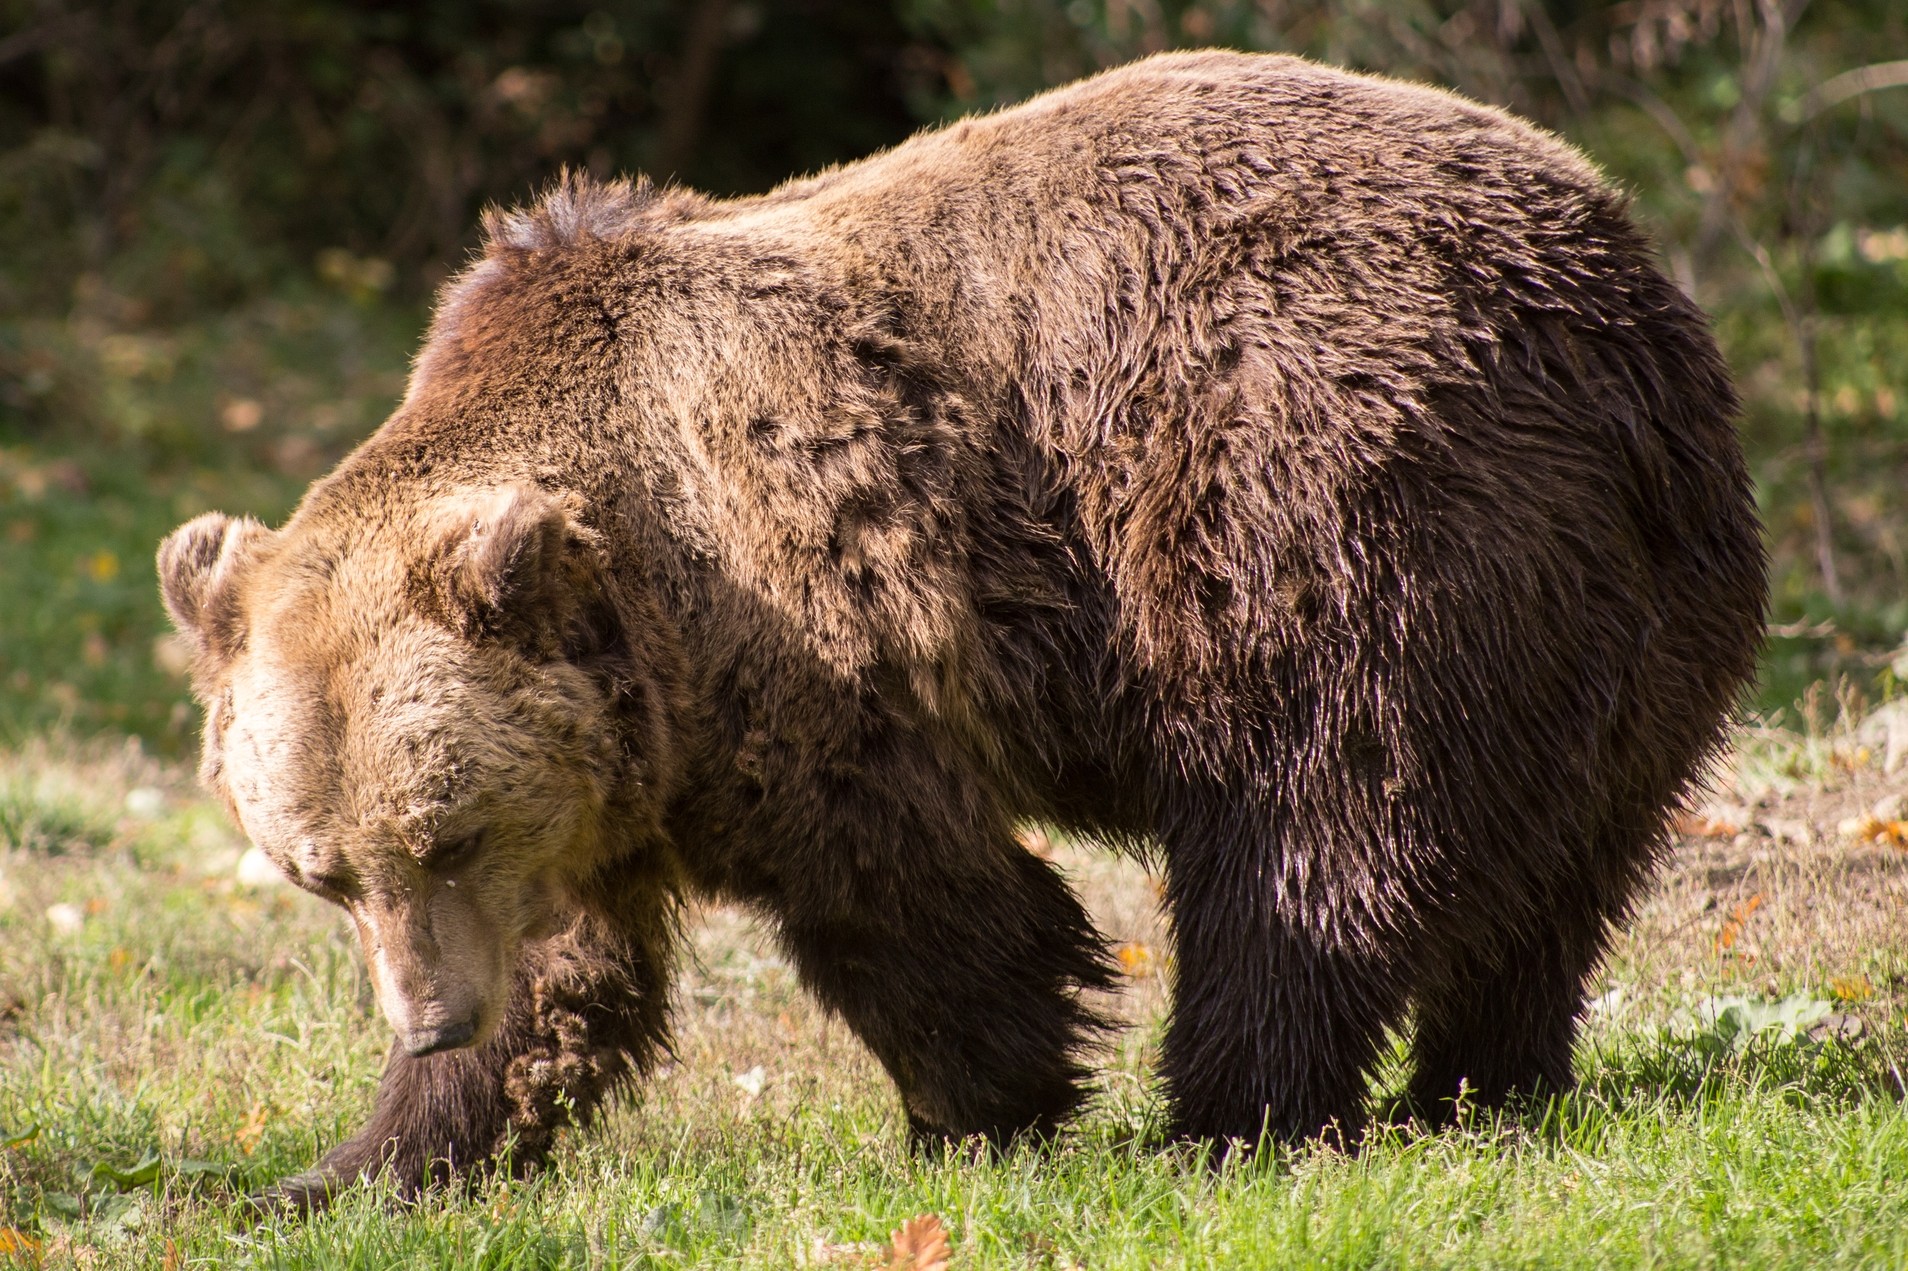 One of the residents at the Romanian bear sanctuary